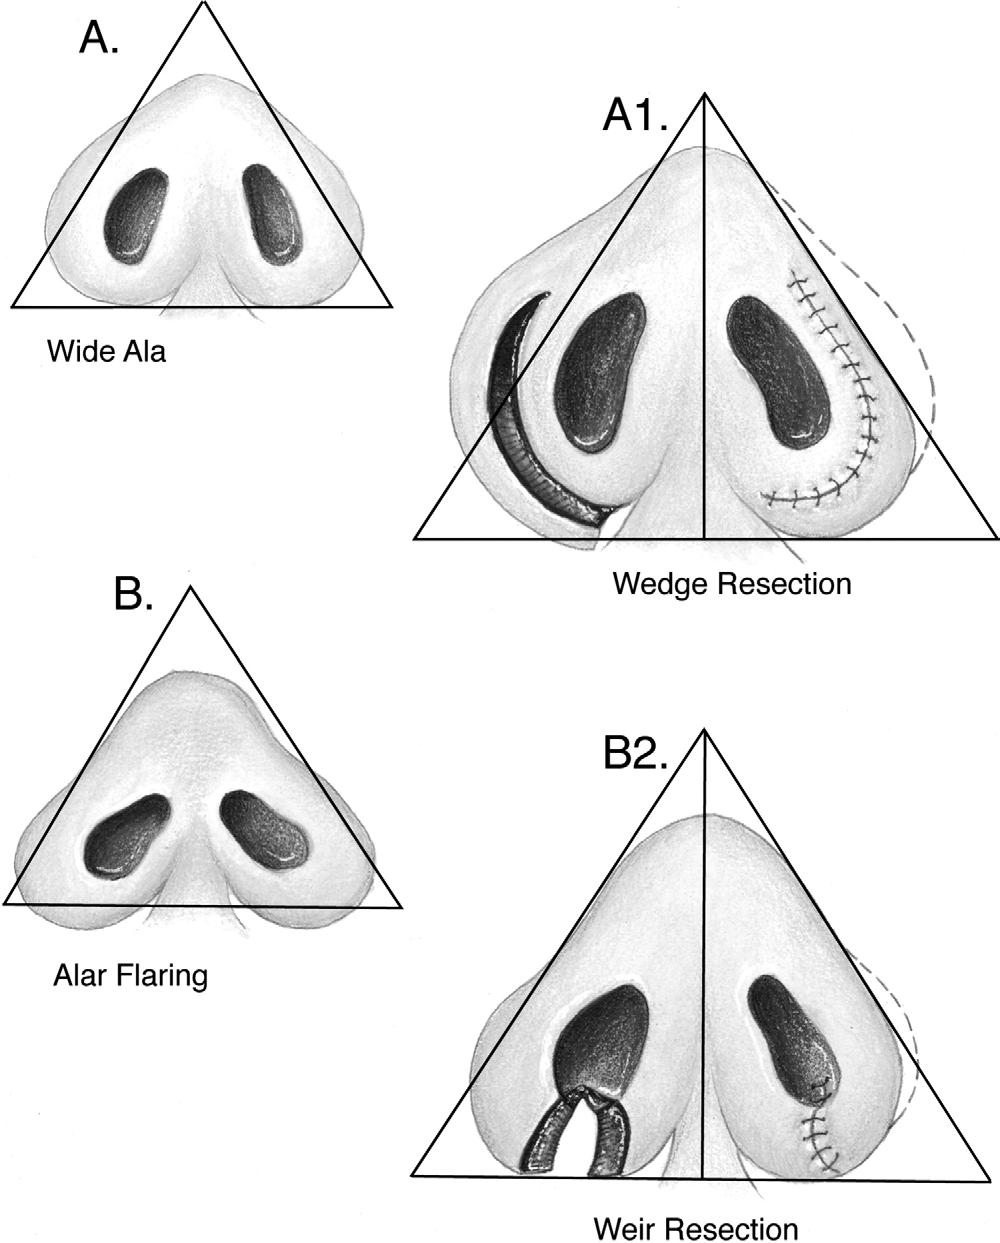 240 Operative Techniques in Otolaryngology, Vol 18, No 3, September 2007 Figure 8 Addressing the base: (A) Wedge resection; (B) Weir resection.